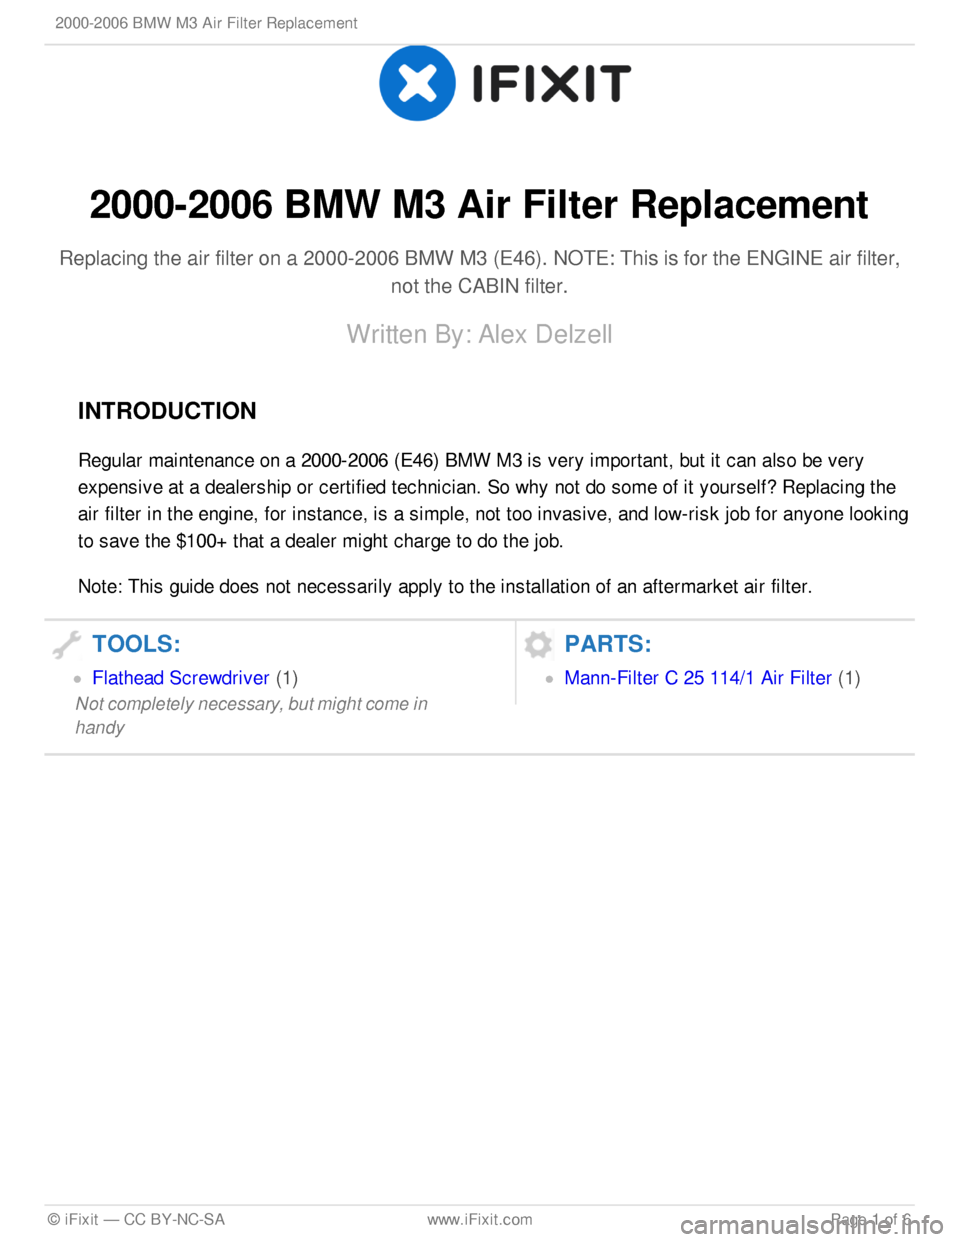 BMW M3 COUPE 2001 E46 Air Filter Replacement 2000-2 006 B M W  M 3 A ir  F ilt e r R ep la cem en t
Repla cin g th e a ir  filt e r o n a  2 000-2 006 B M W  M 3 ( E 46). N O TE : T his  is  fo r th e E N G IN E a ir  filt e r,
not th e C ABIN  